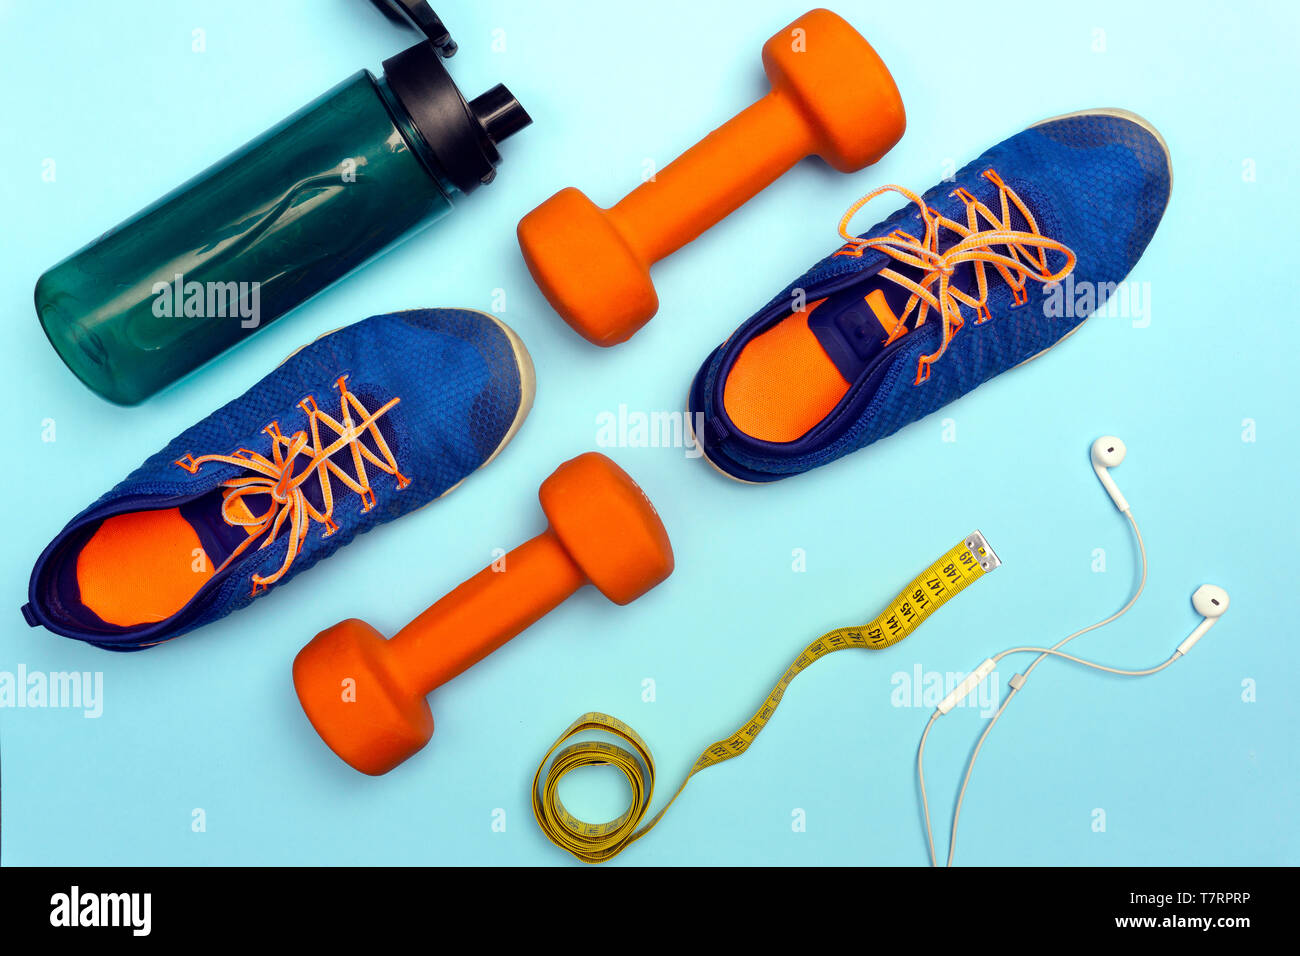 Sport concept with sport equipment composition. Sneakers, dumbbells, bottle of water on bright blue background. Weight loss, flat lay Stock Photo